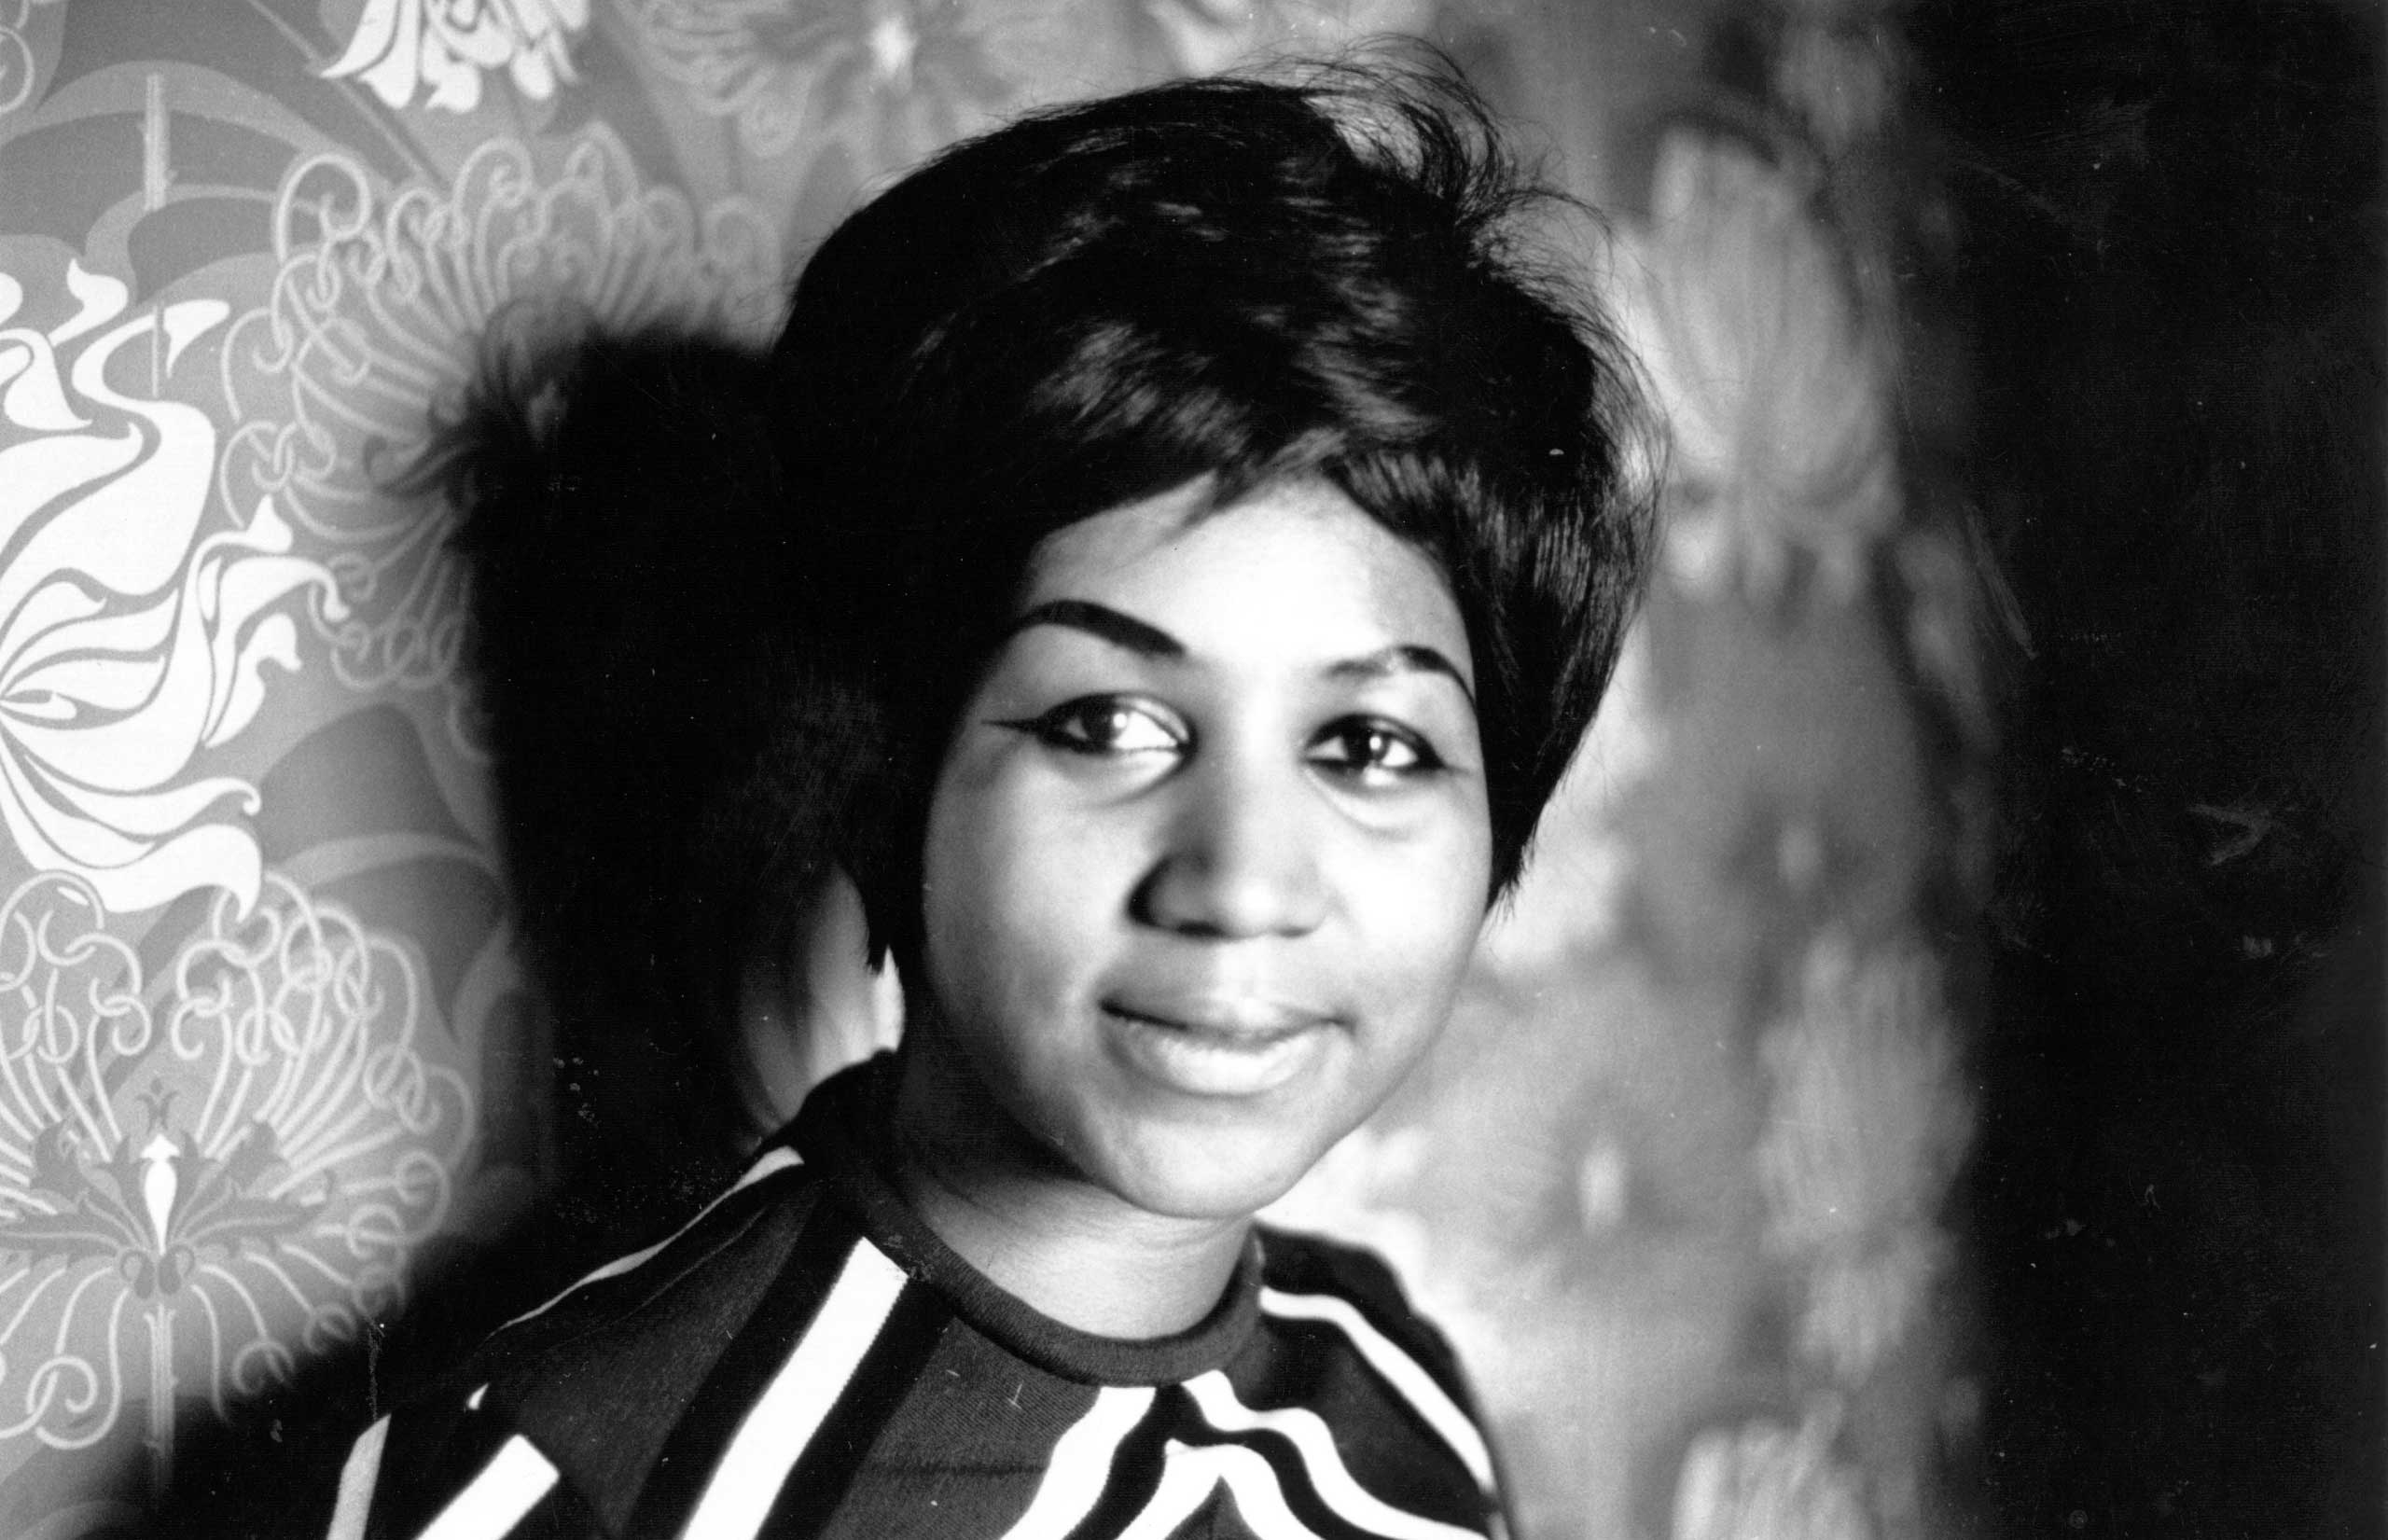 Aretha Franklin Medal of Freedom for Music, 1985